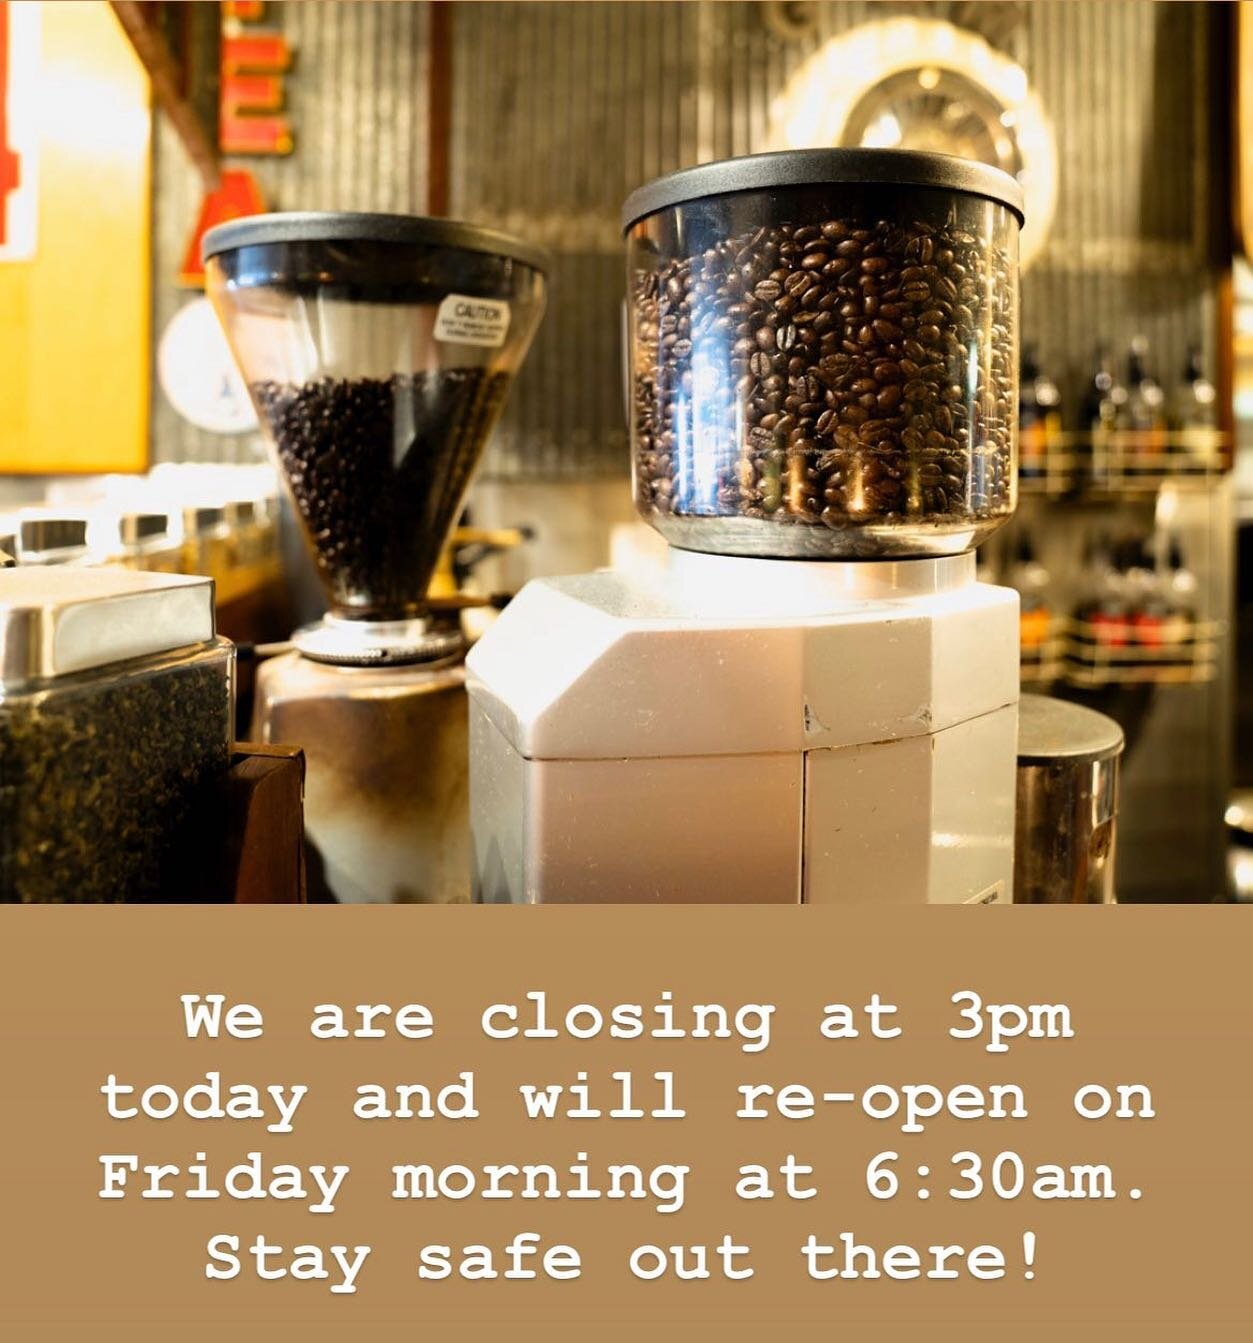 We apologize for the inconvenience, but we want everyone to stay safe! Stop in before 3pm today if you need some coffee beans for your Thursday morning cup of joe!